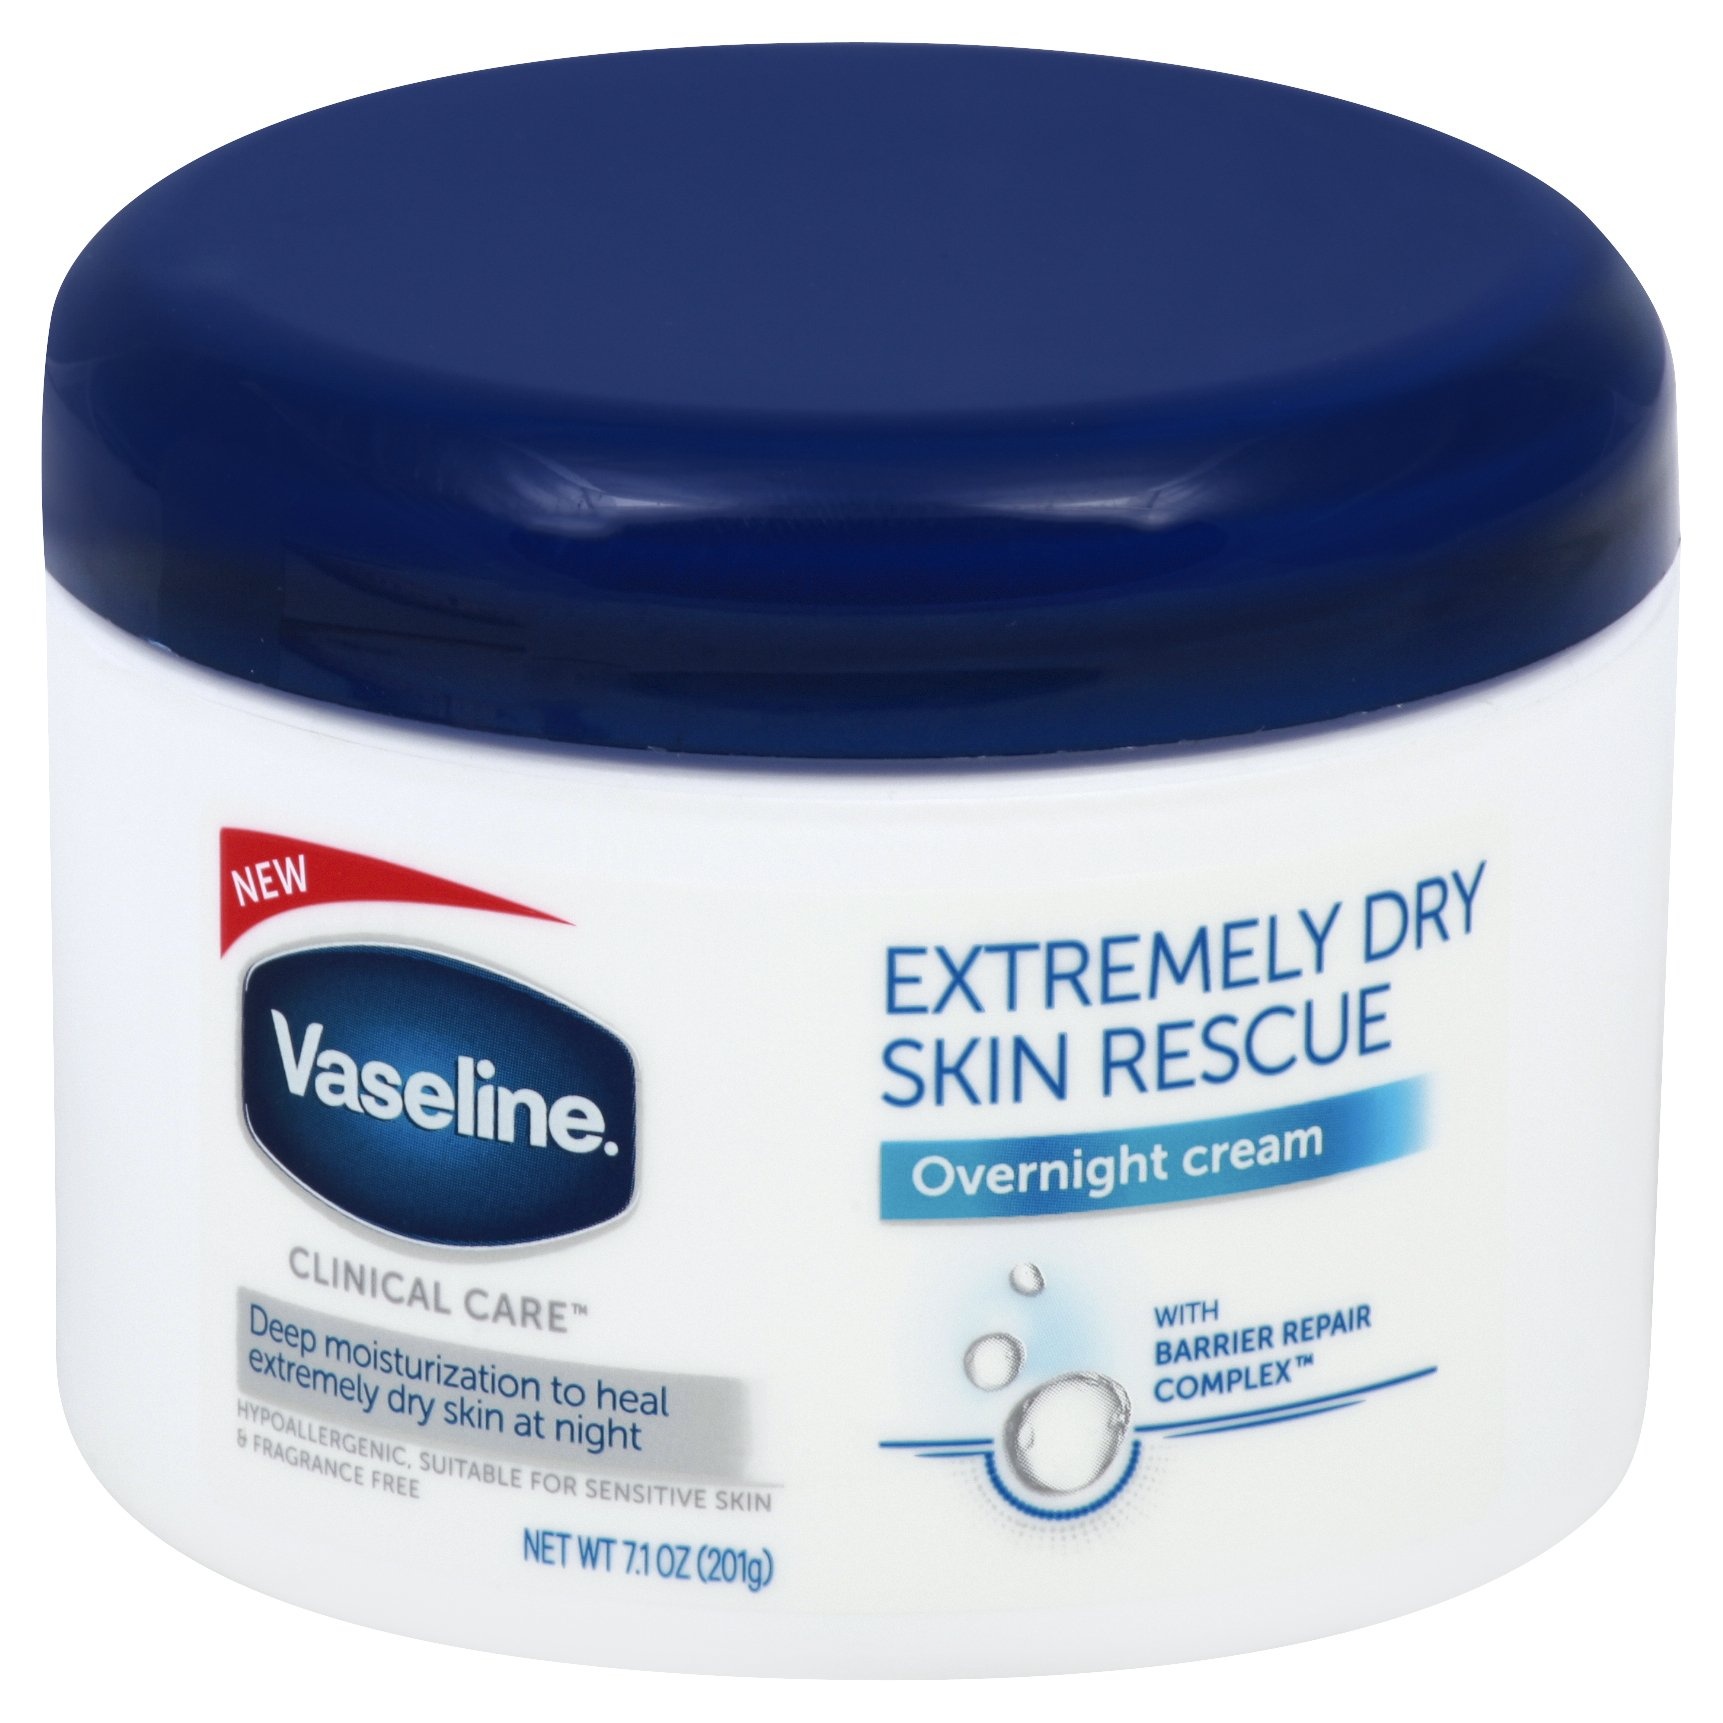 slide 1 of 1, Vaseline Clinical Care Extremely Dry Skin Rescue Body Cream, 7.1 oz